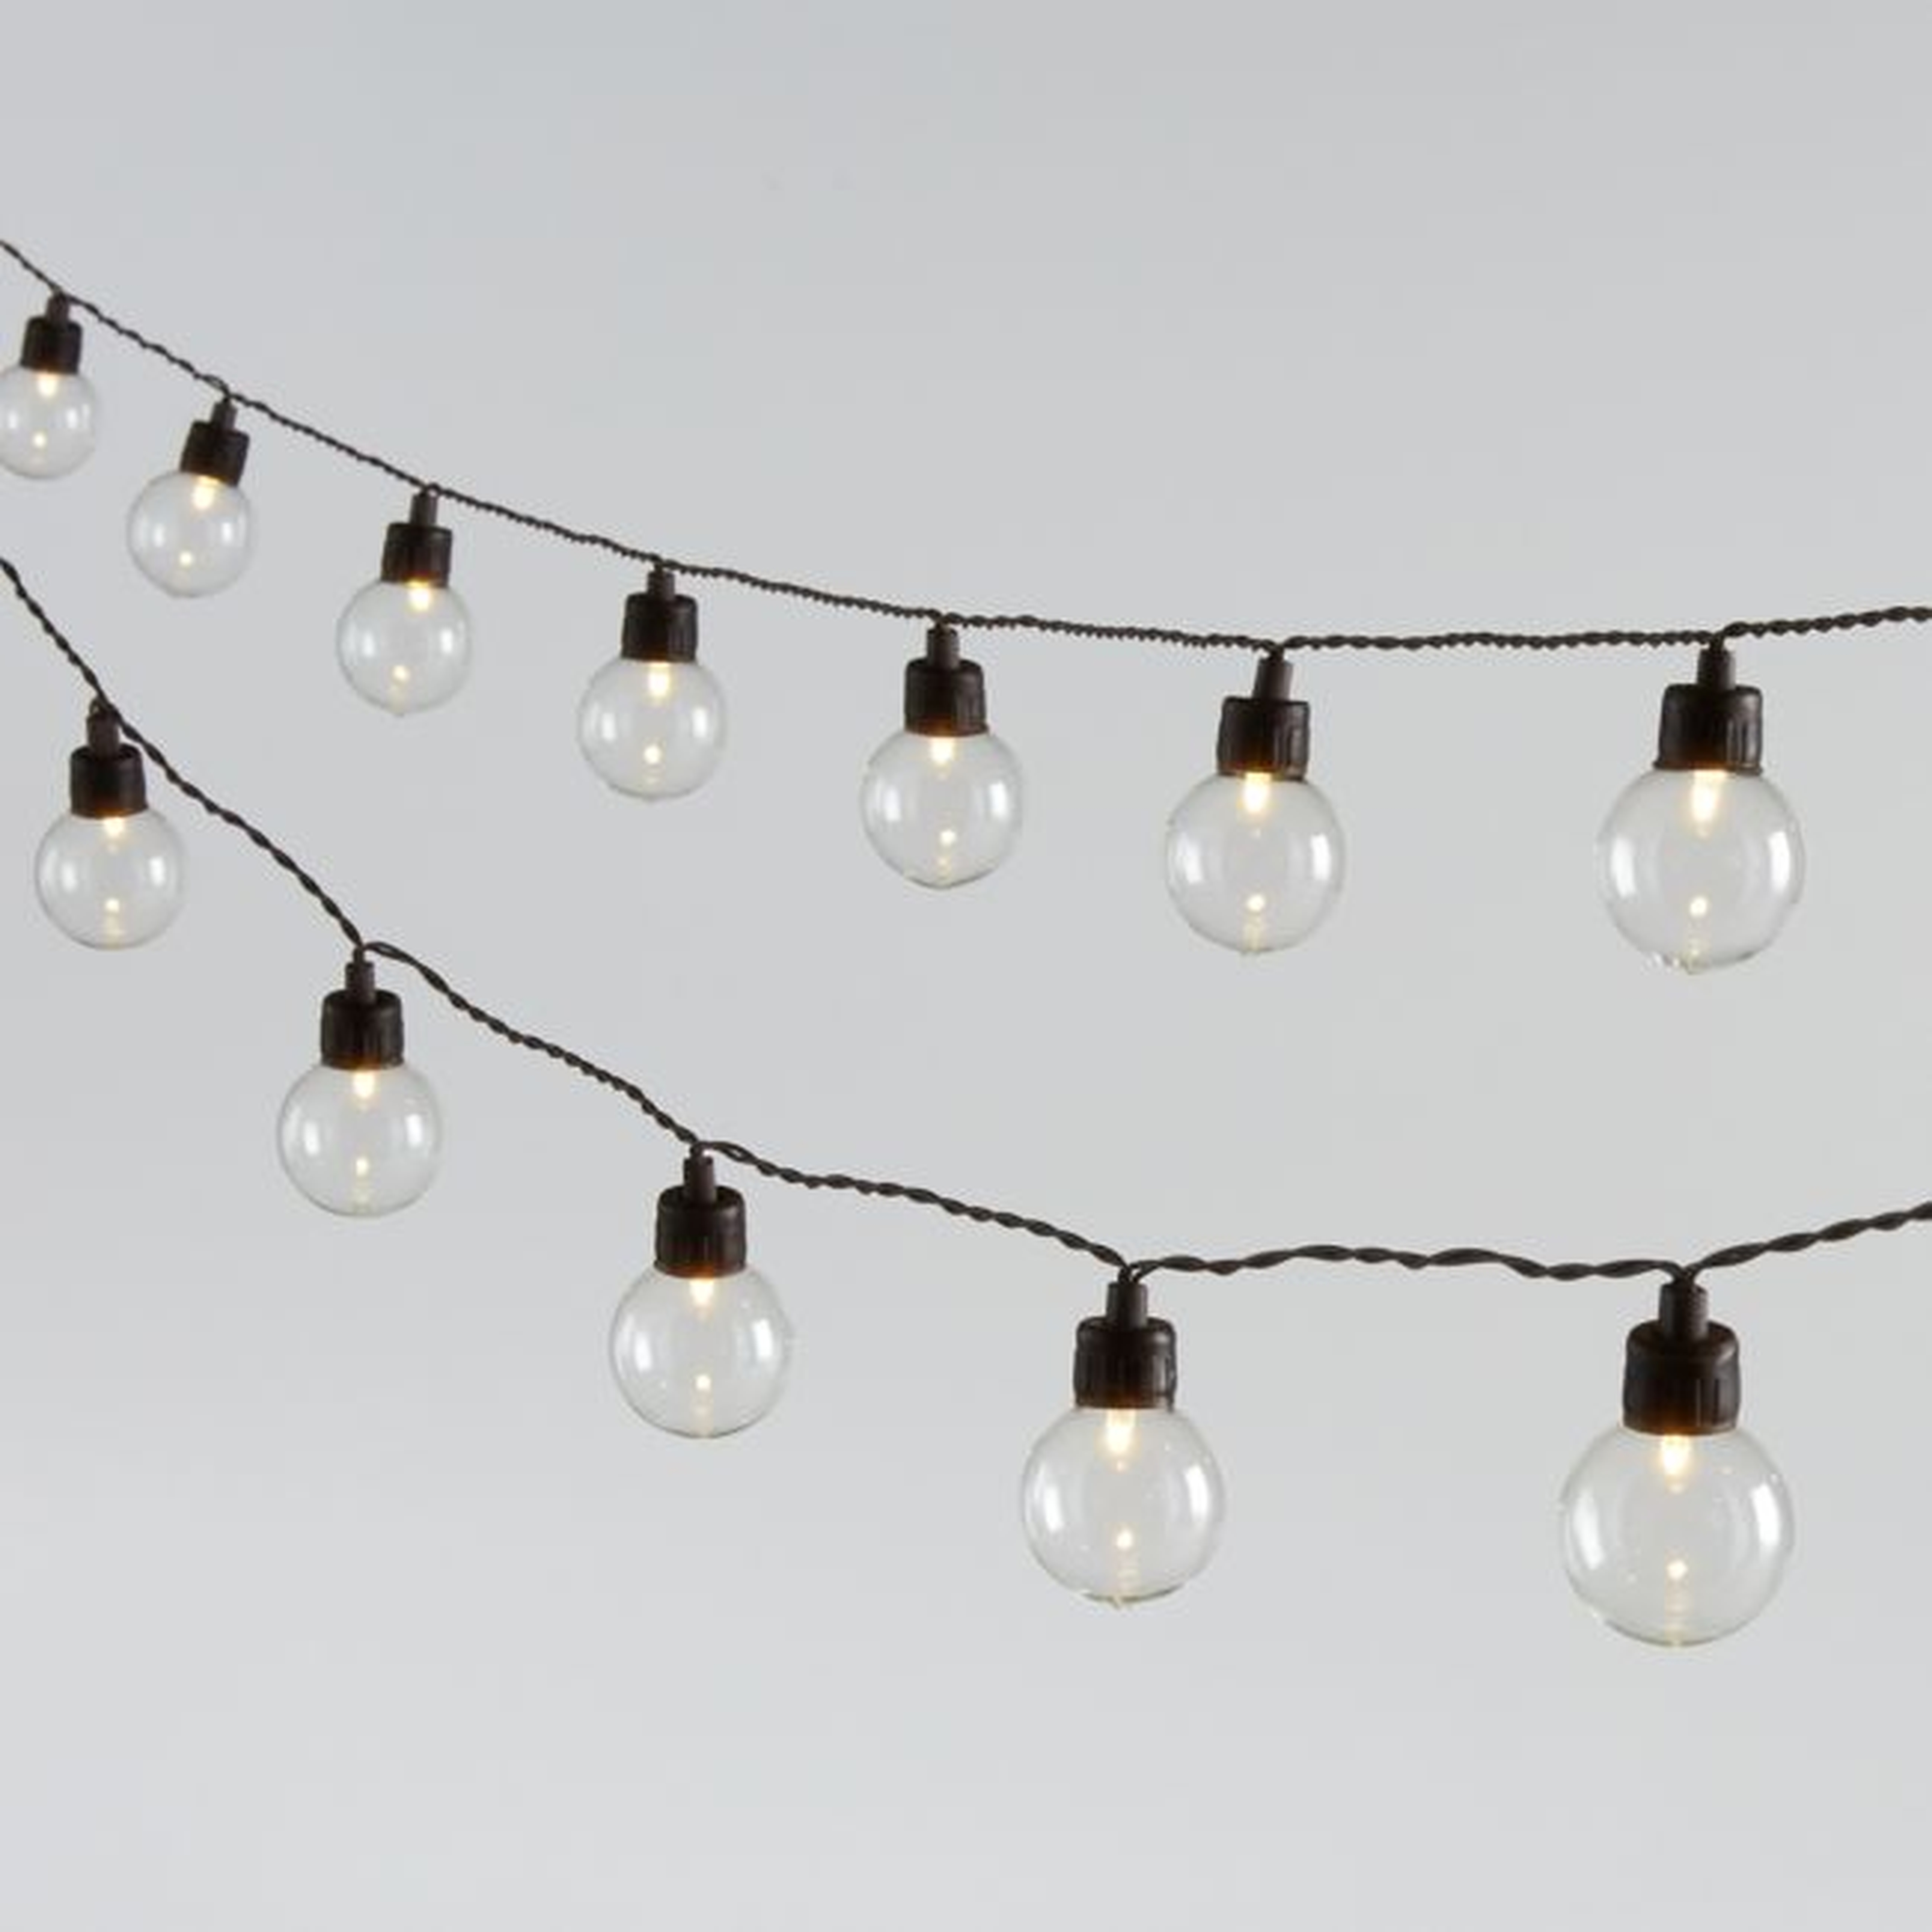 20-Count Solar Globe String Lights - Crate and Barrel